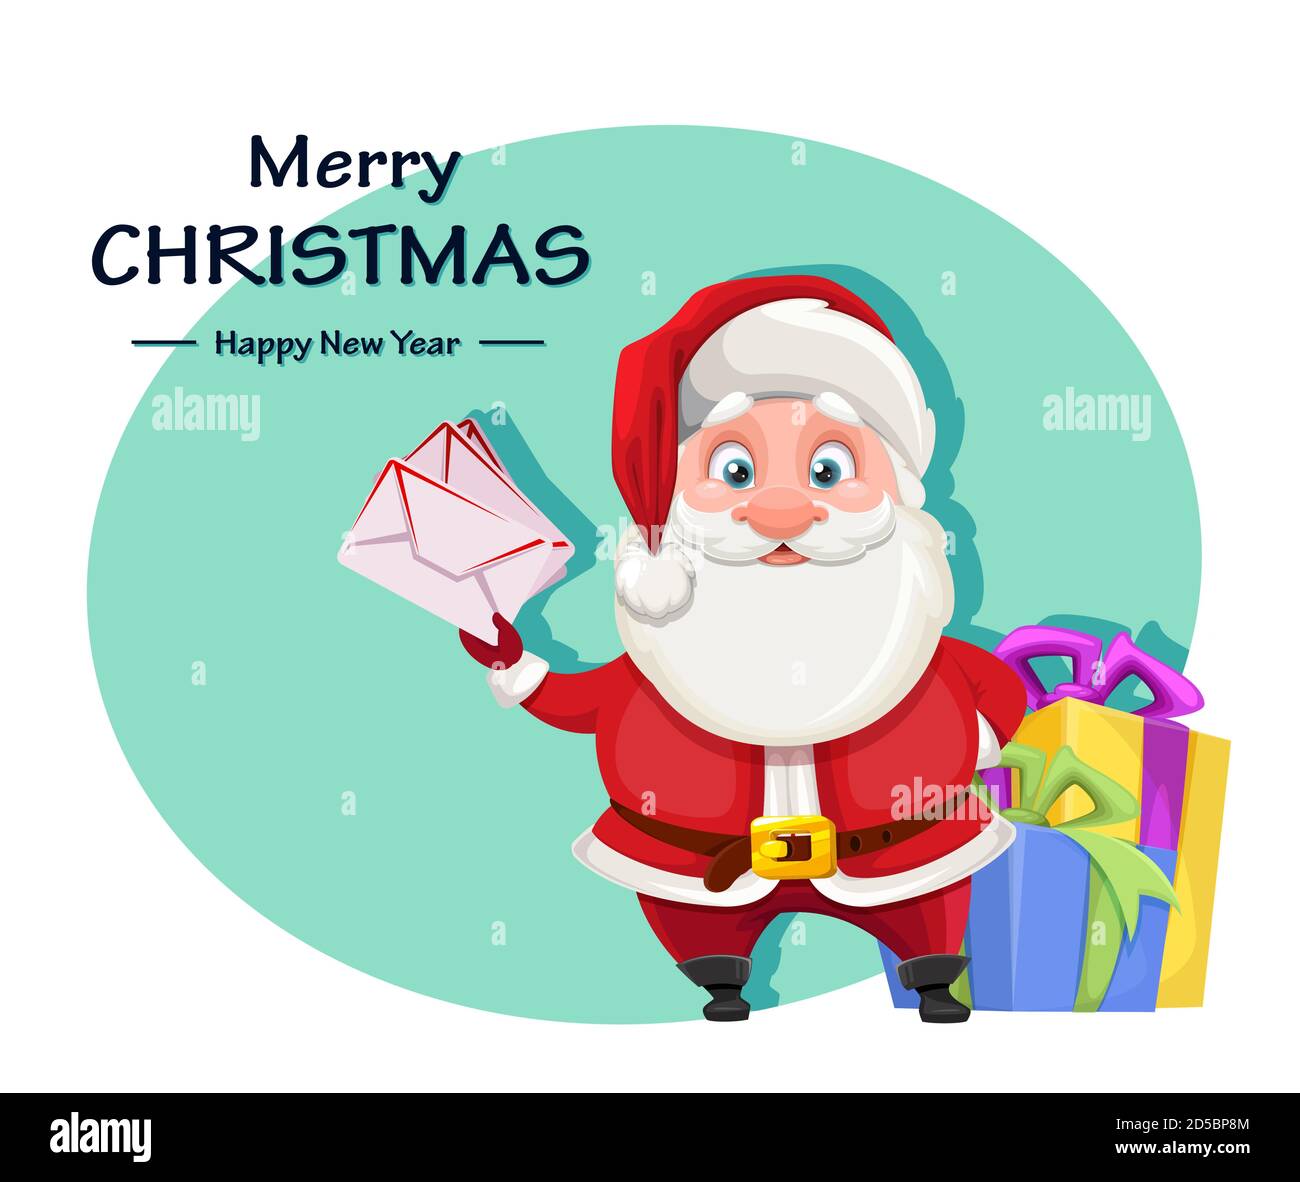 Merry Christmas and Happy New Year greeting card. Cheerful Santa Claus preparing presents for kids. Vector illustration Stock Vector